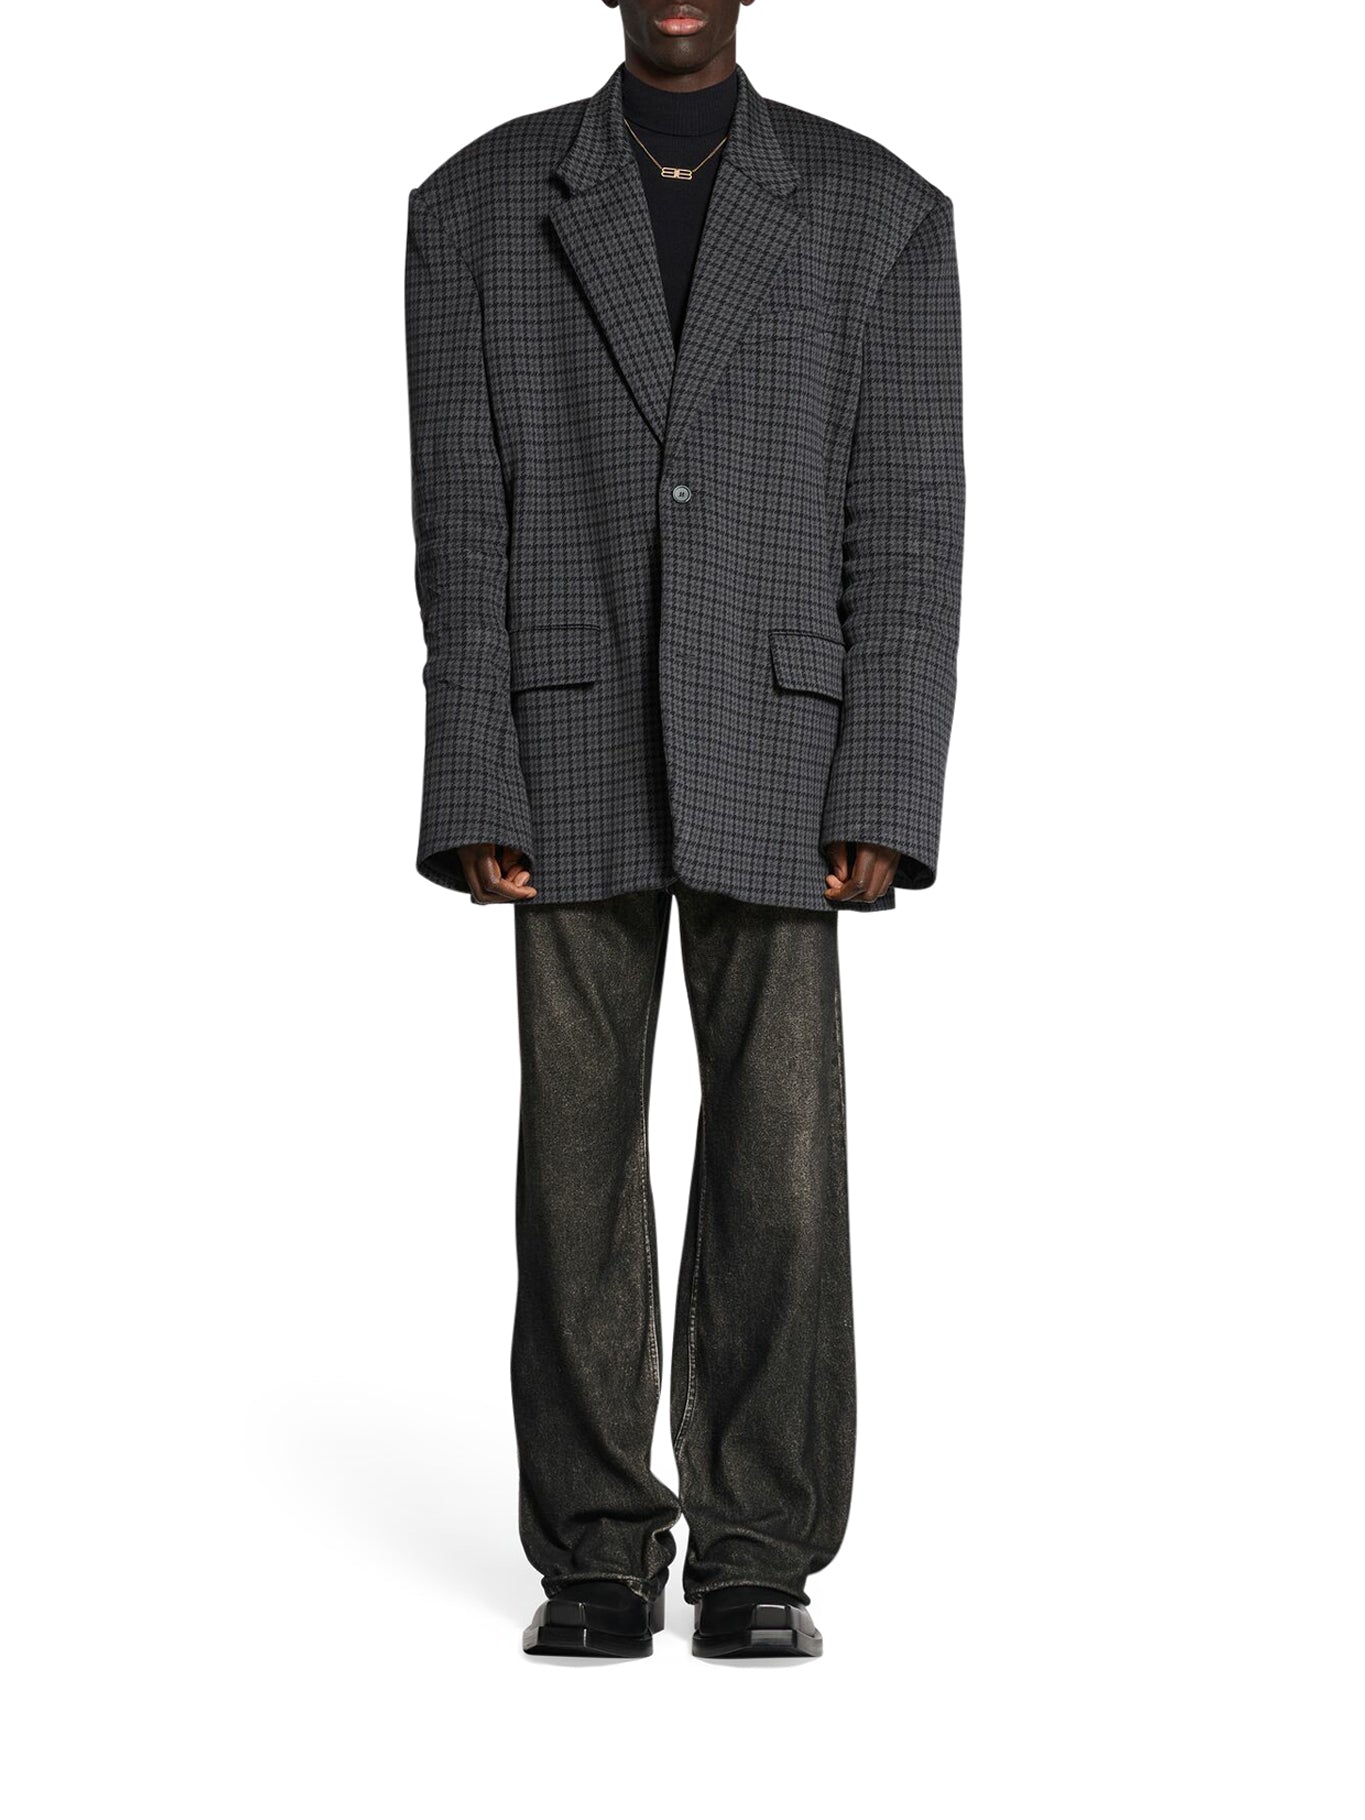 Tailored knit jacket with gray houndstooth pattern